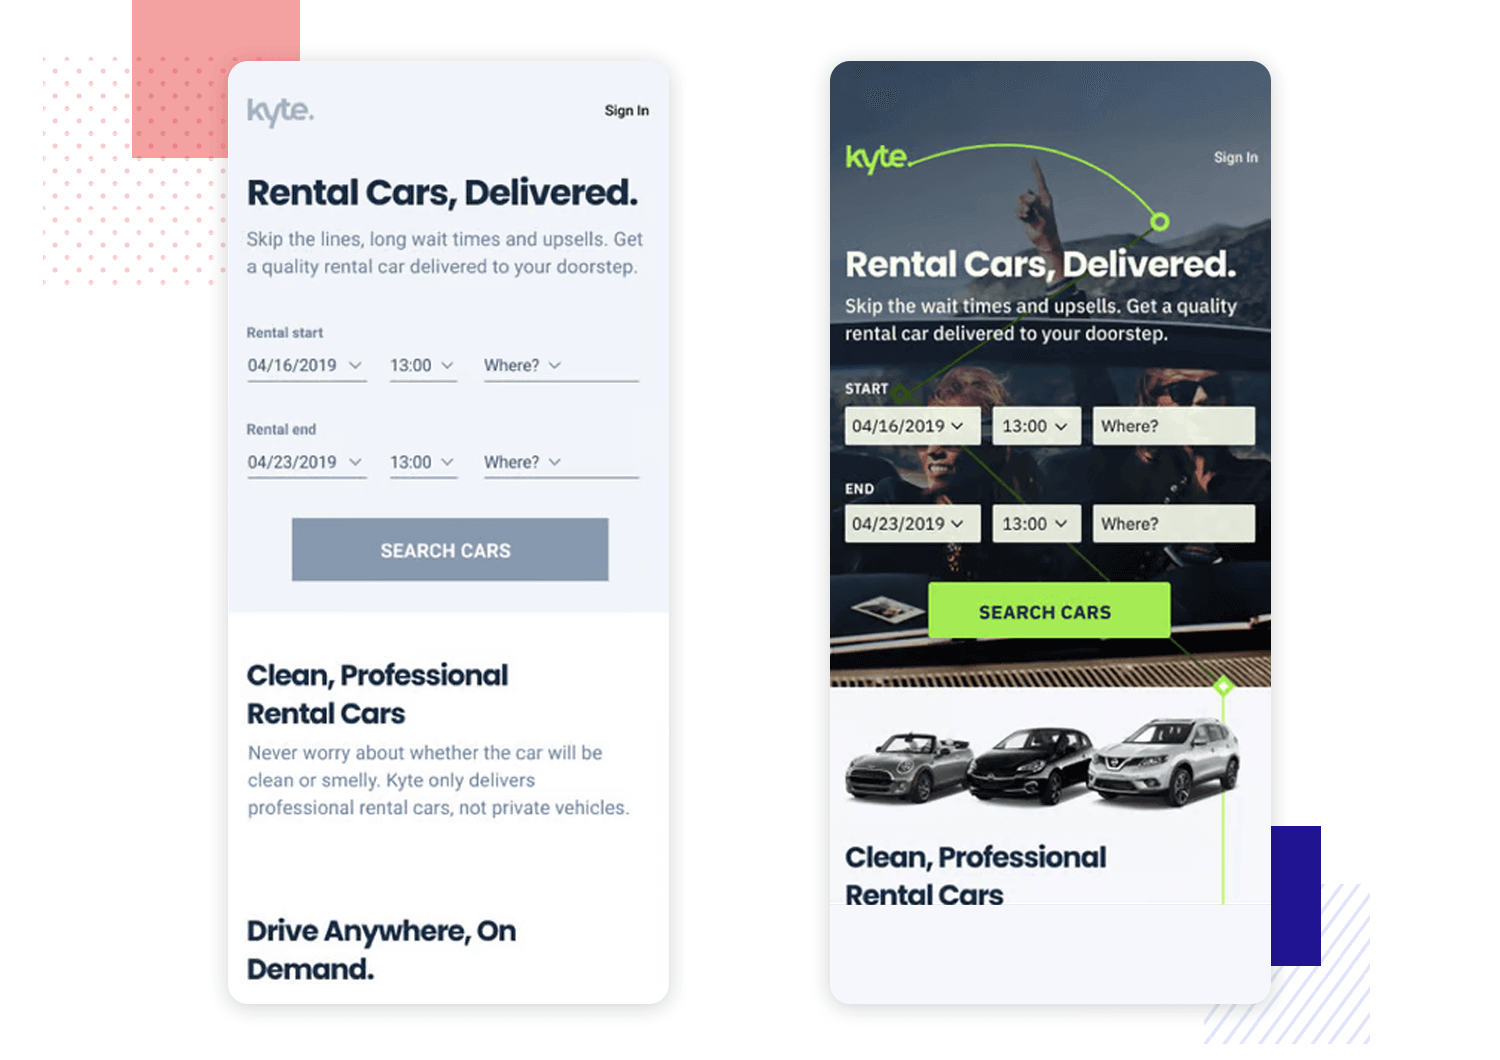 High-fidelity mockups of a car rental app highlighting features such as rental scheduling, professional service description, and seamless car delivery.